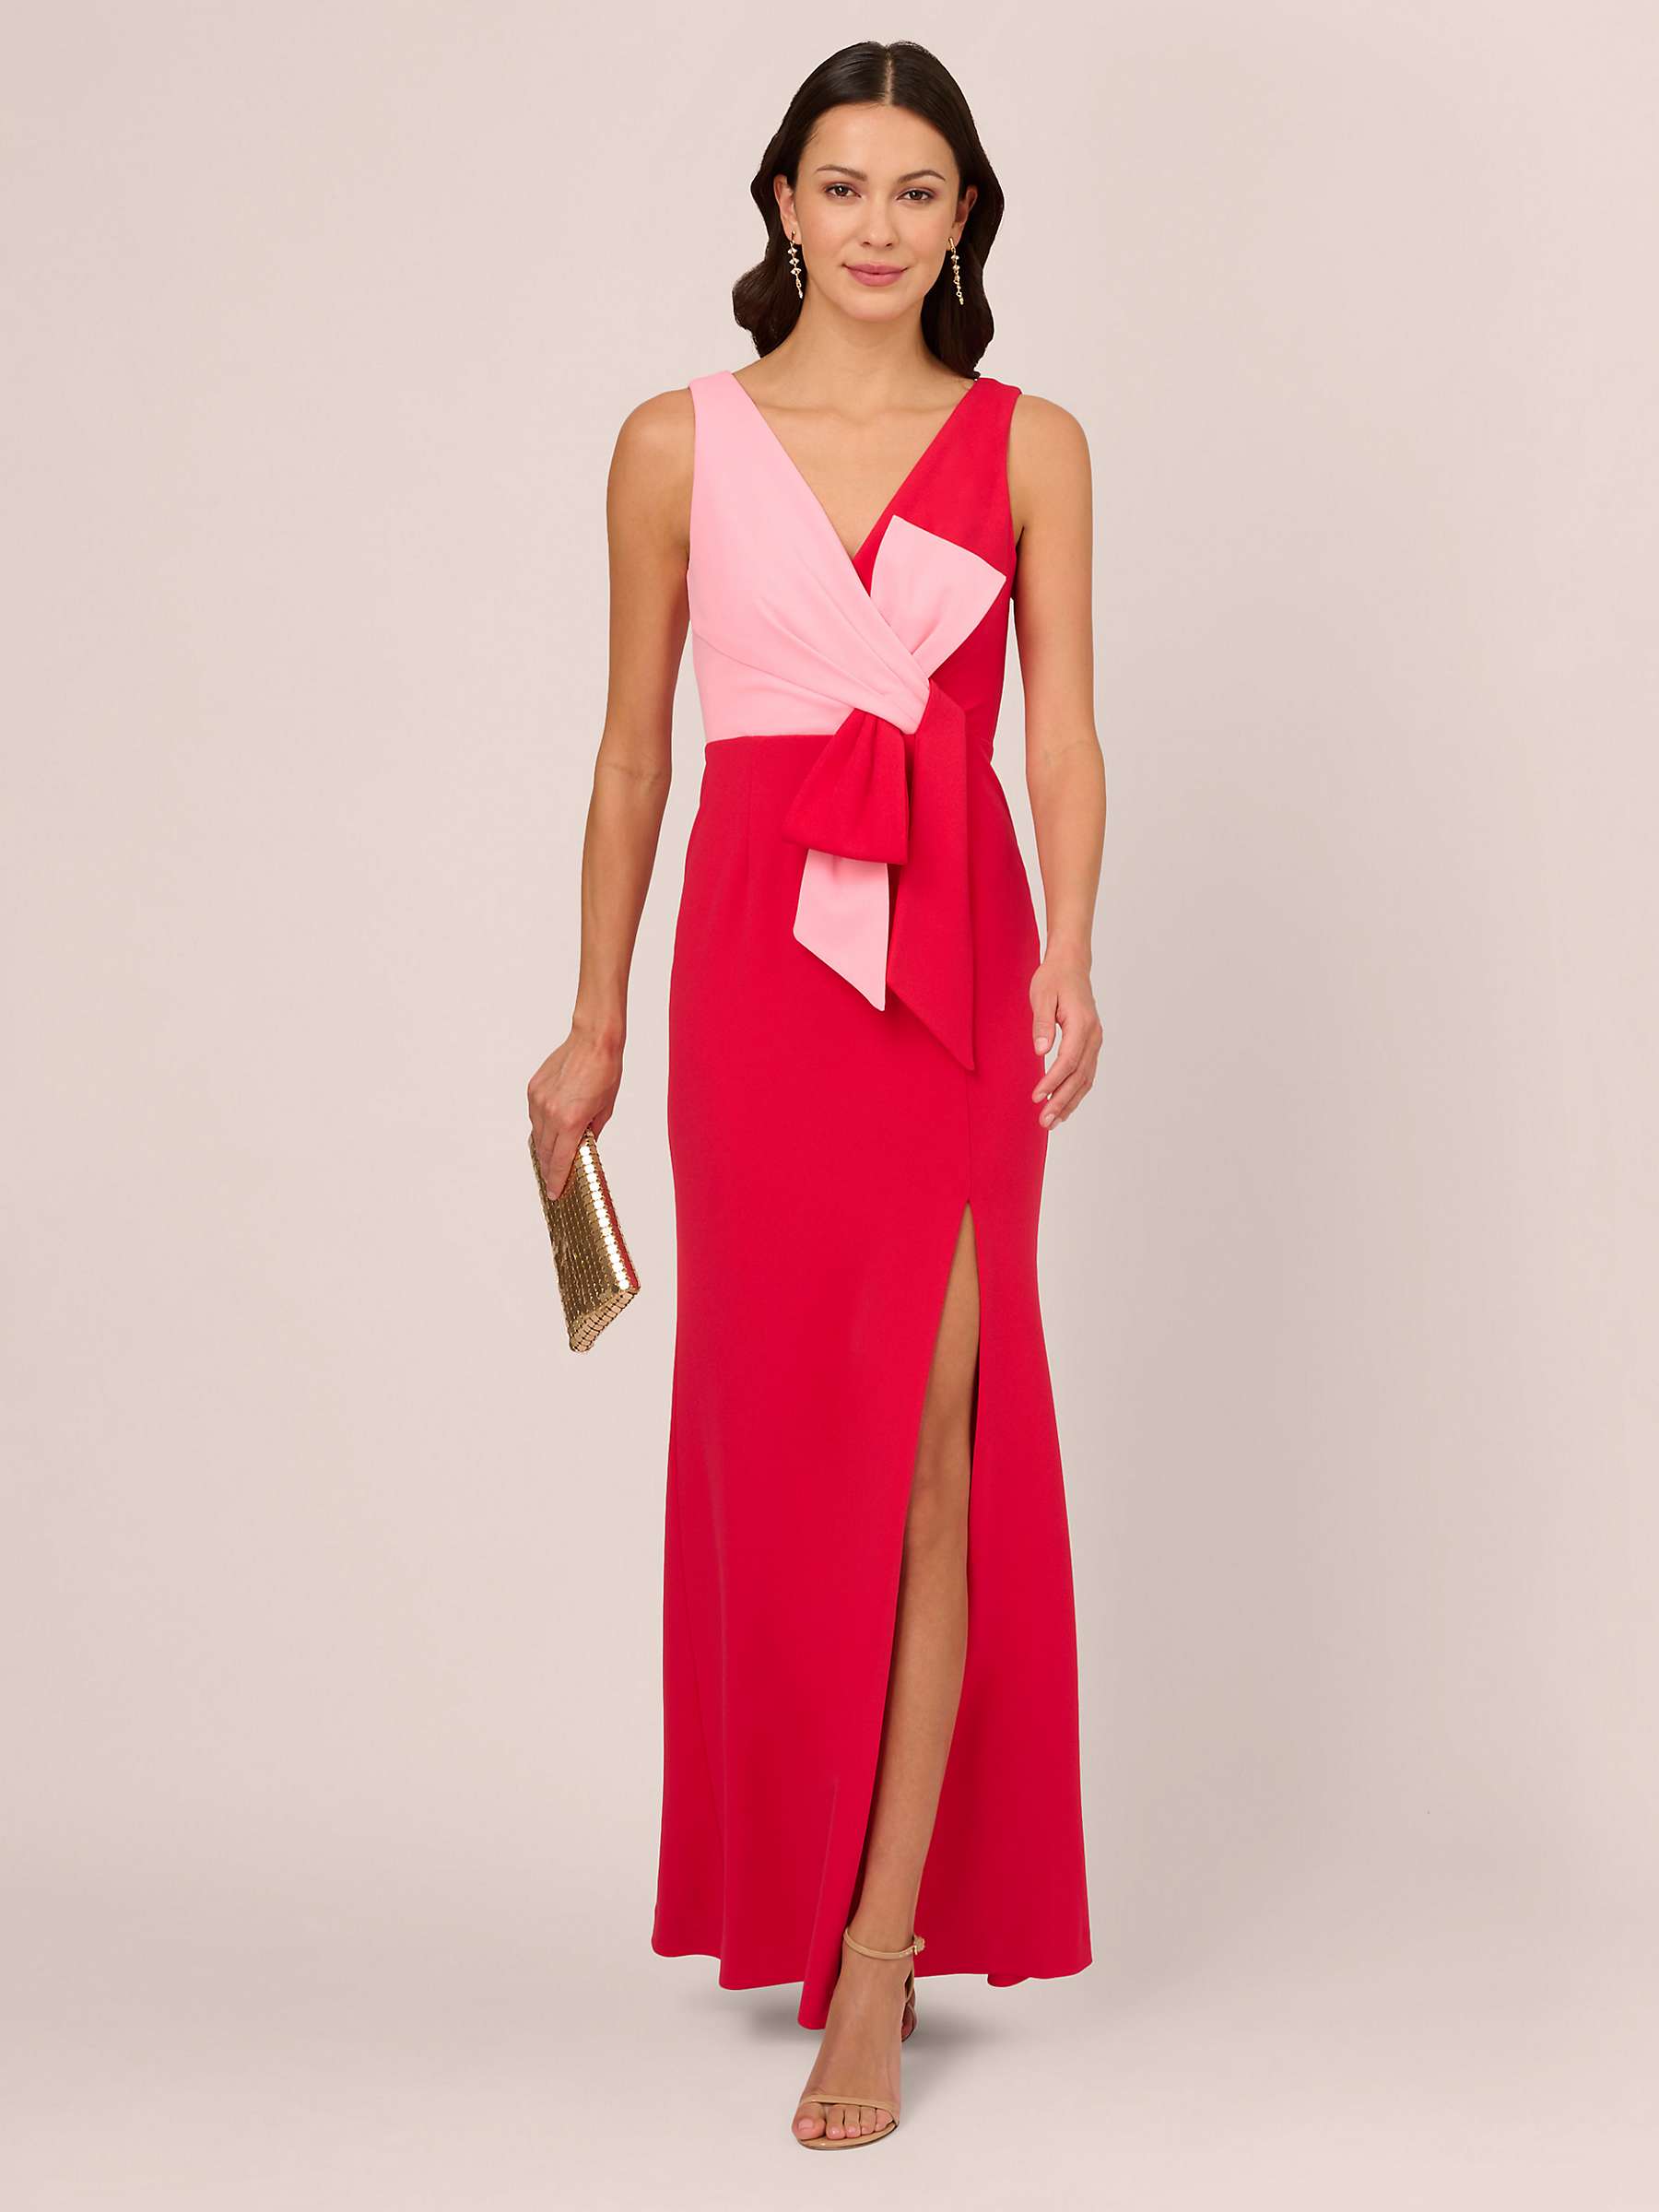 Buy Adrianna Papell Colour Block Maxi Dress, Pink/Red Online at johnlewis.com